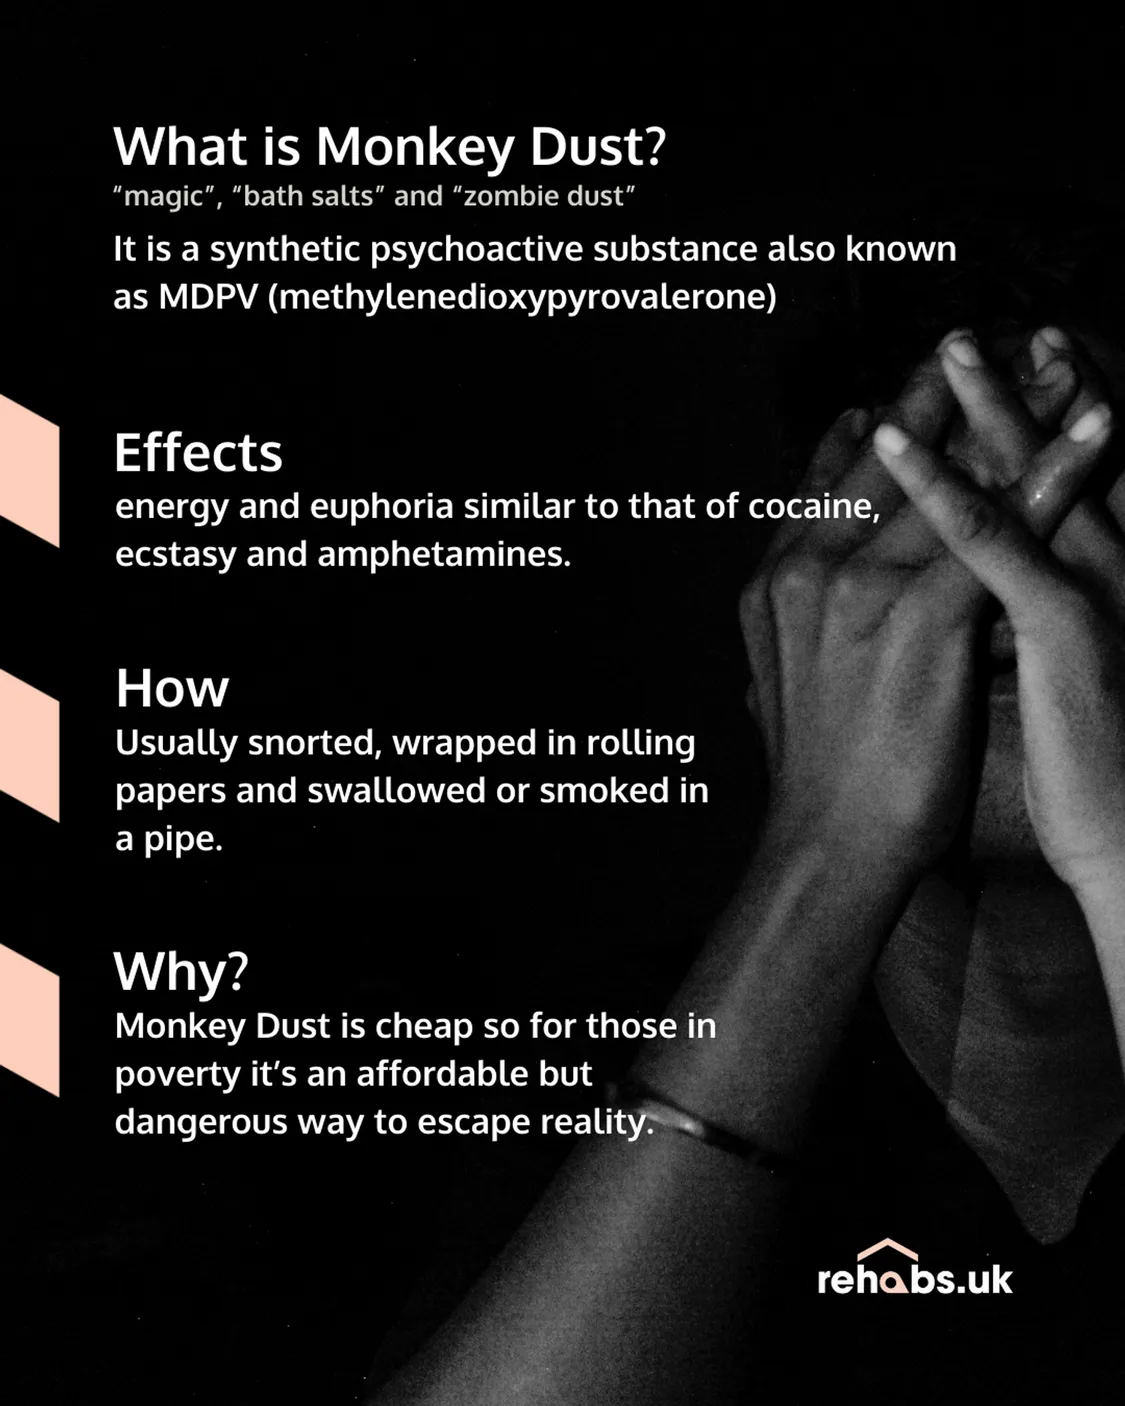 Do you know what Monkey Dust is? Monkey Dust, Bath Salts or Zombie Dust, chemically known as MDPV, is a synthetic drug that has surged in popularity in the UK. It offers an intense high similar to amphetamines for a cheap price. We offer support, and encourage those affected to seek the help they deserve. Your share can make a difference!